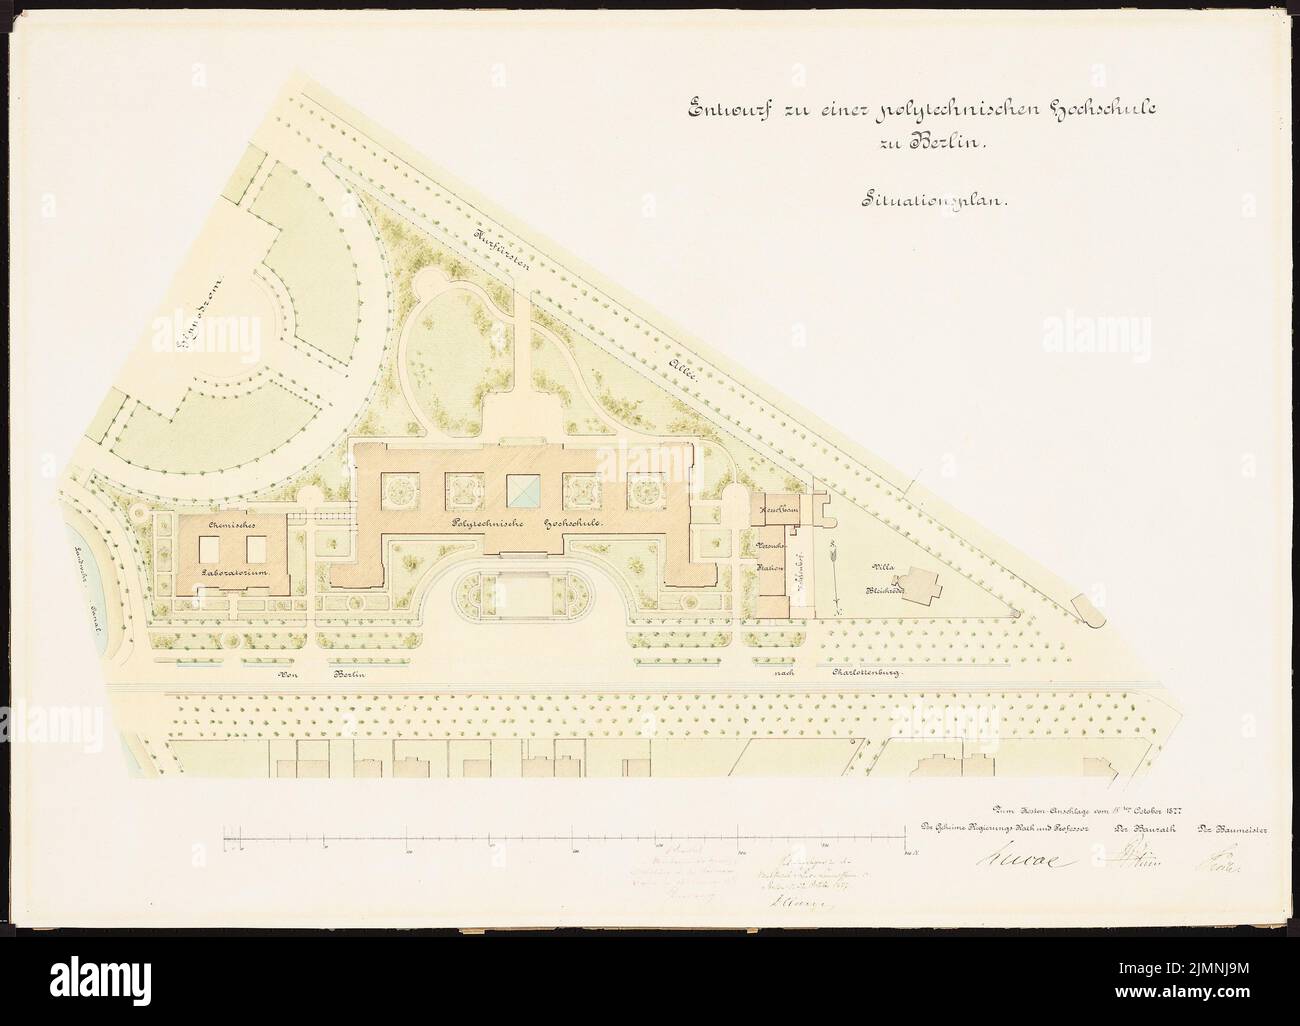 Lucae Richard (1829-1877), Technical University Berlin-Charlottenburg. Location Hippodrom site in the Tiergarten (October 18, 1877): Situation plan. Tusche watercolor on the box, 55.9 x 77.6 cm (including scan edges) Stock Photo